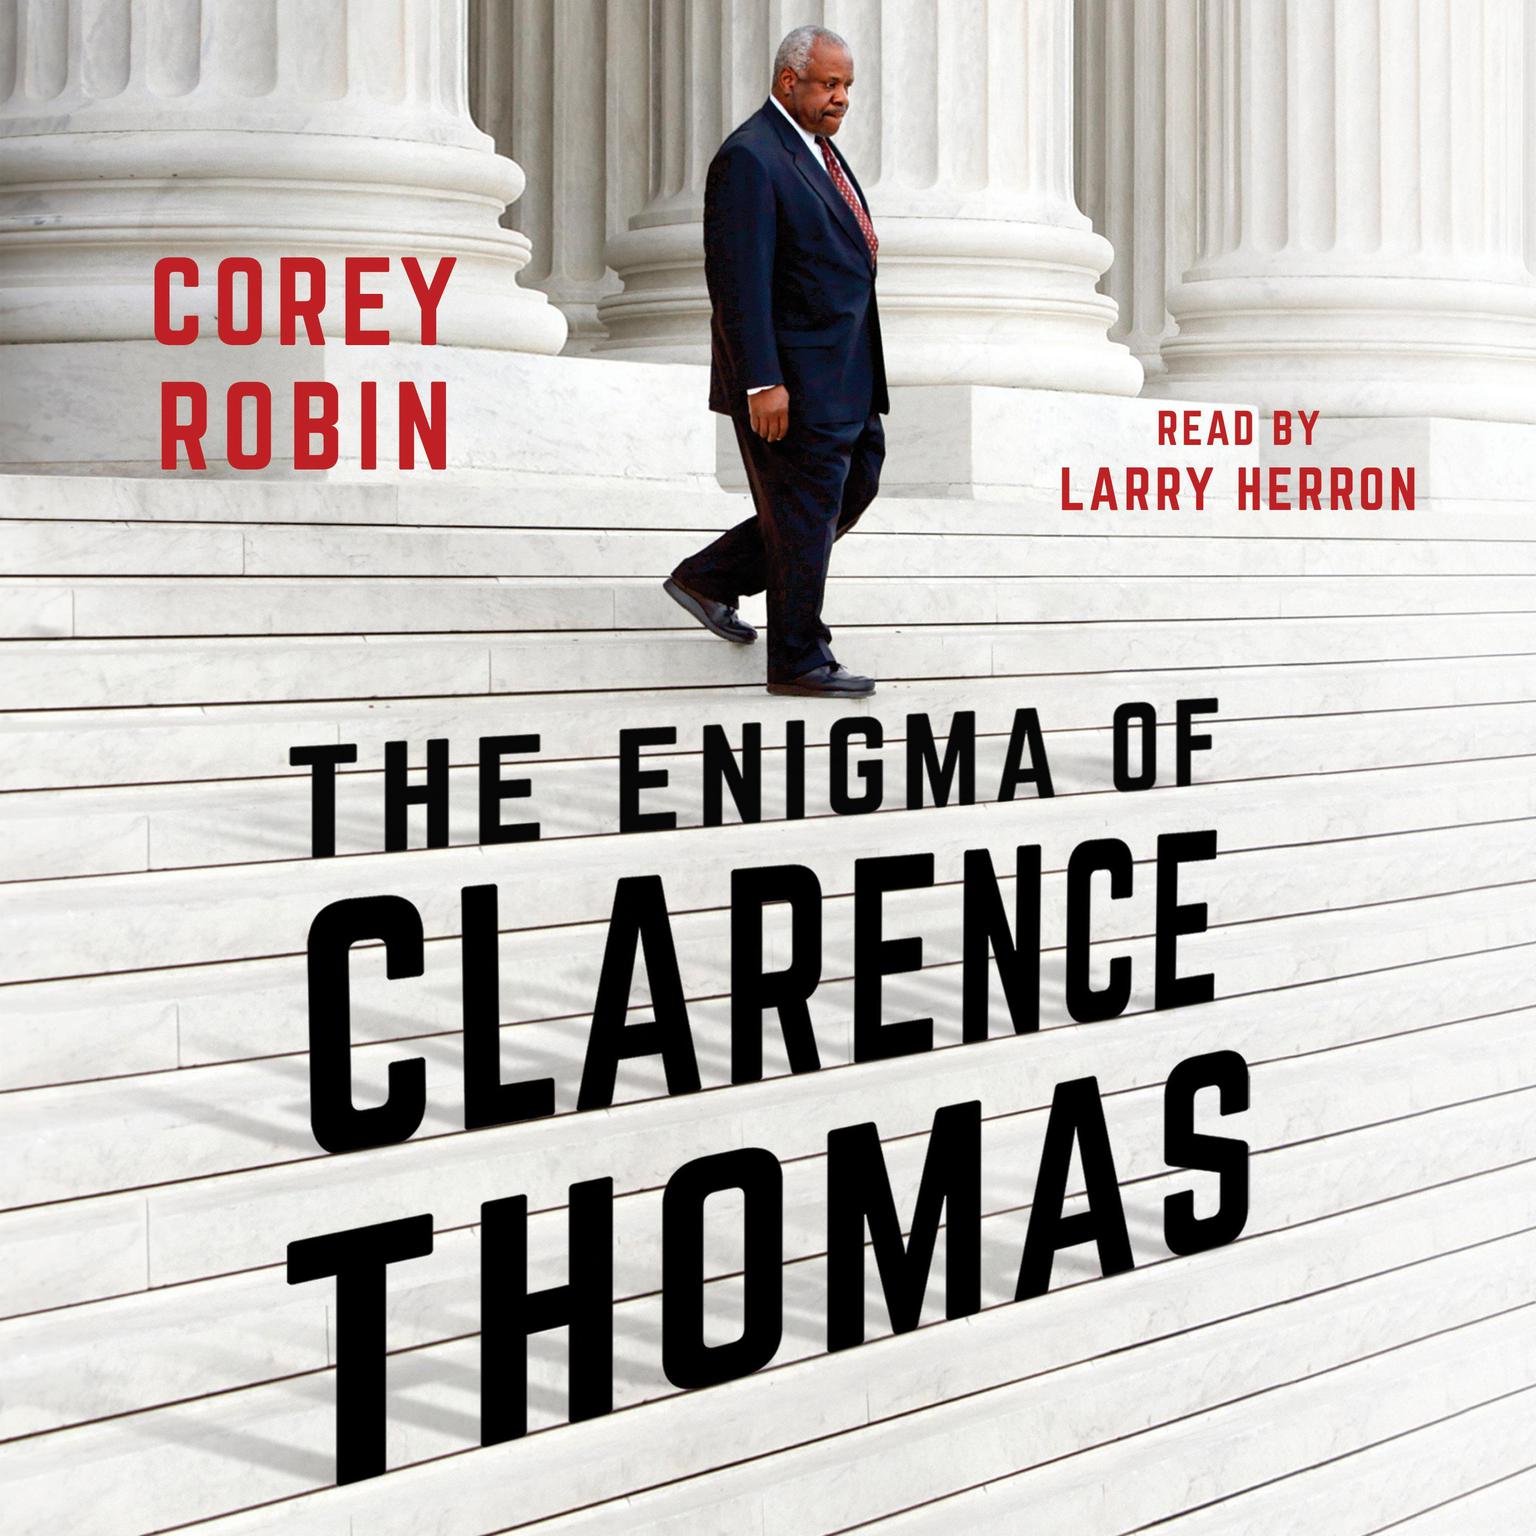 The Enigma of Clarence Thomas Audiobook, by Corey Robin